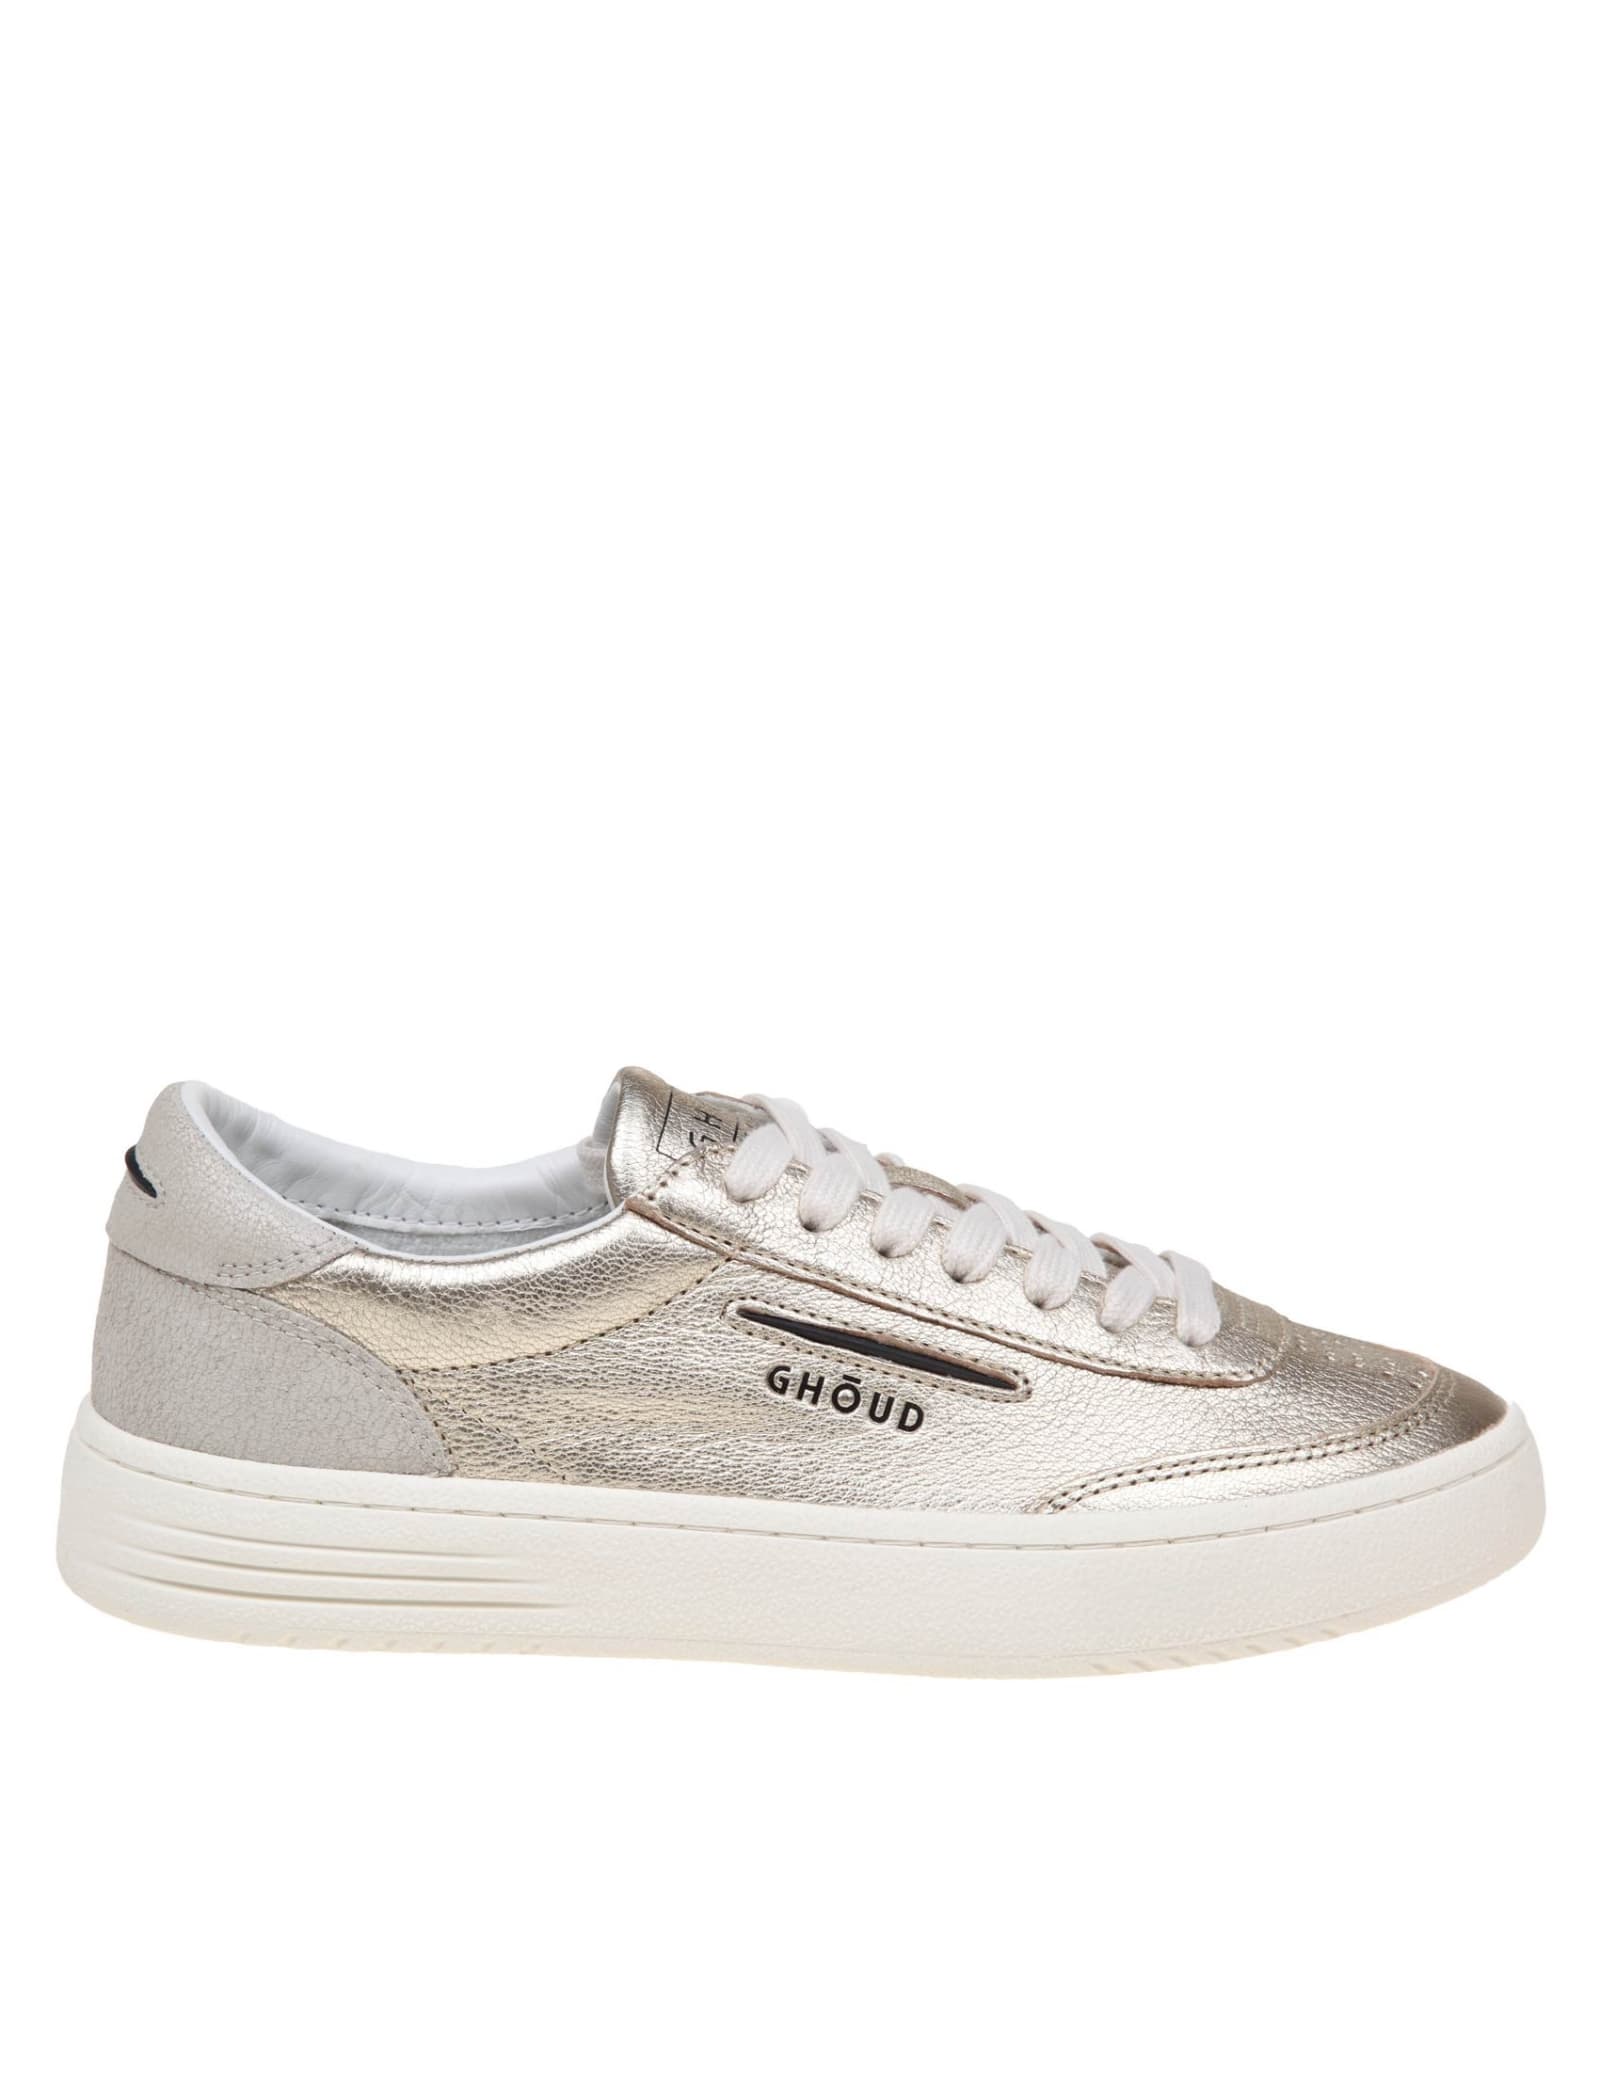 Ghoud Lido Low Sneakers In Platinum Color Leather In Gold